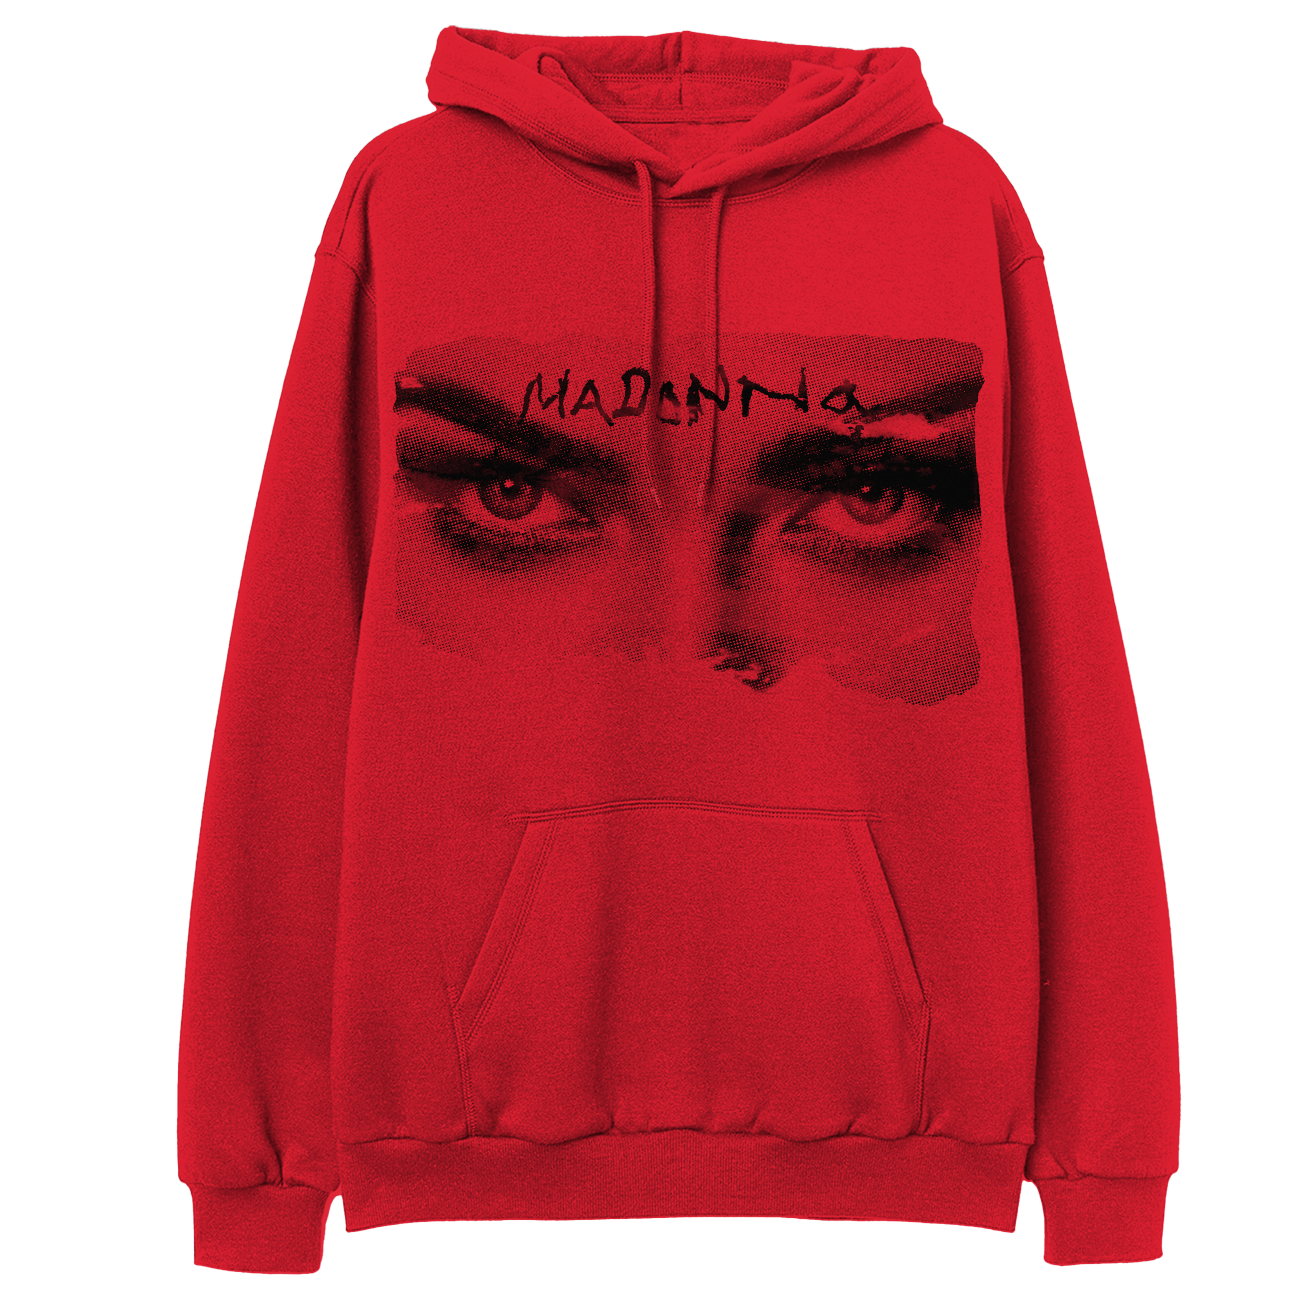 'Finally Enough Love' Pullover Hoodie